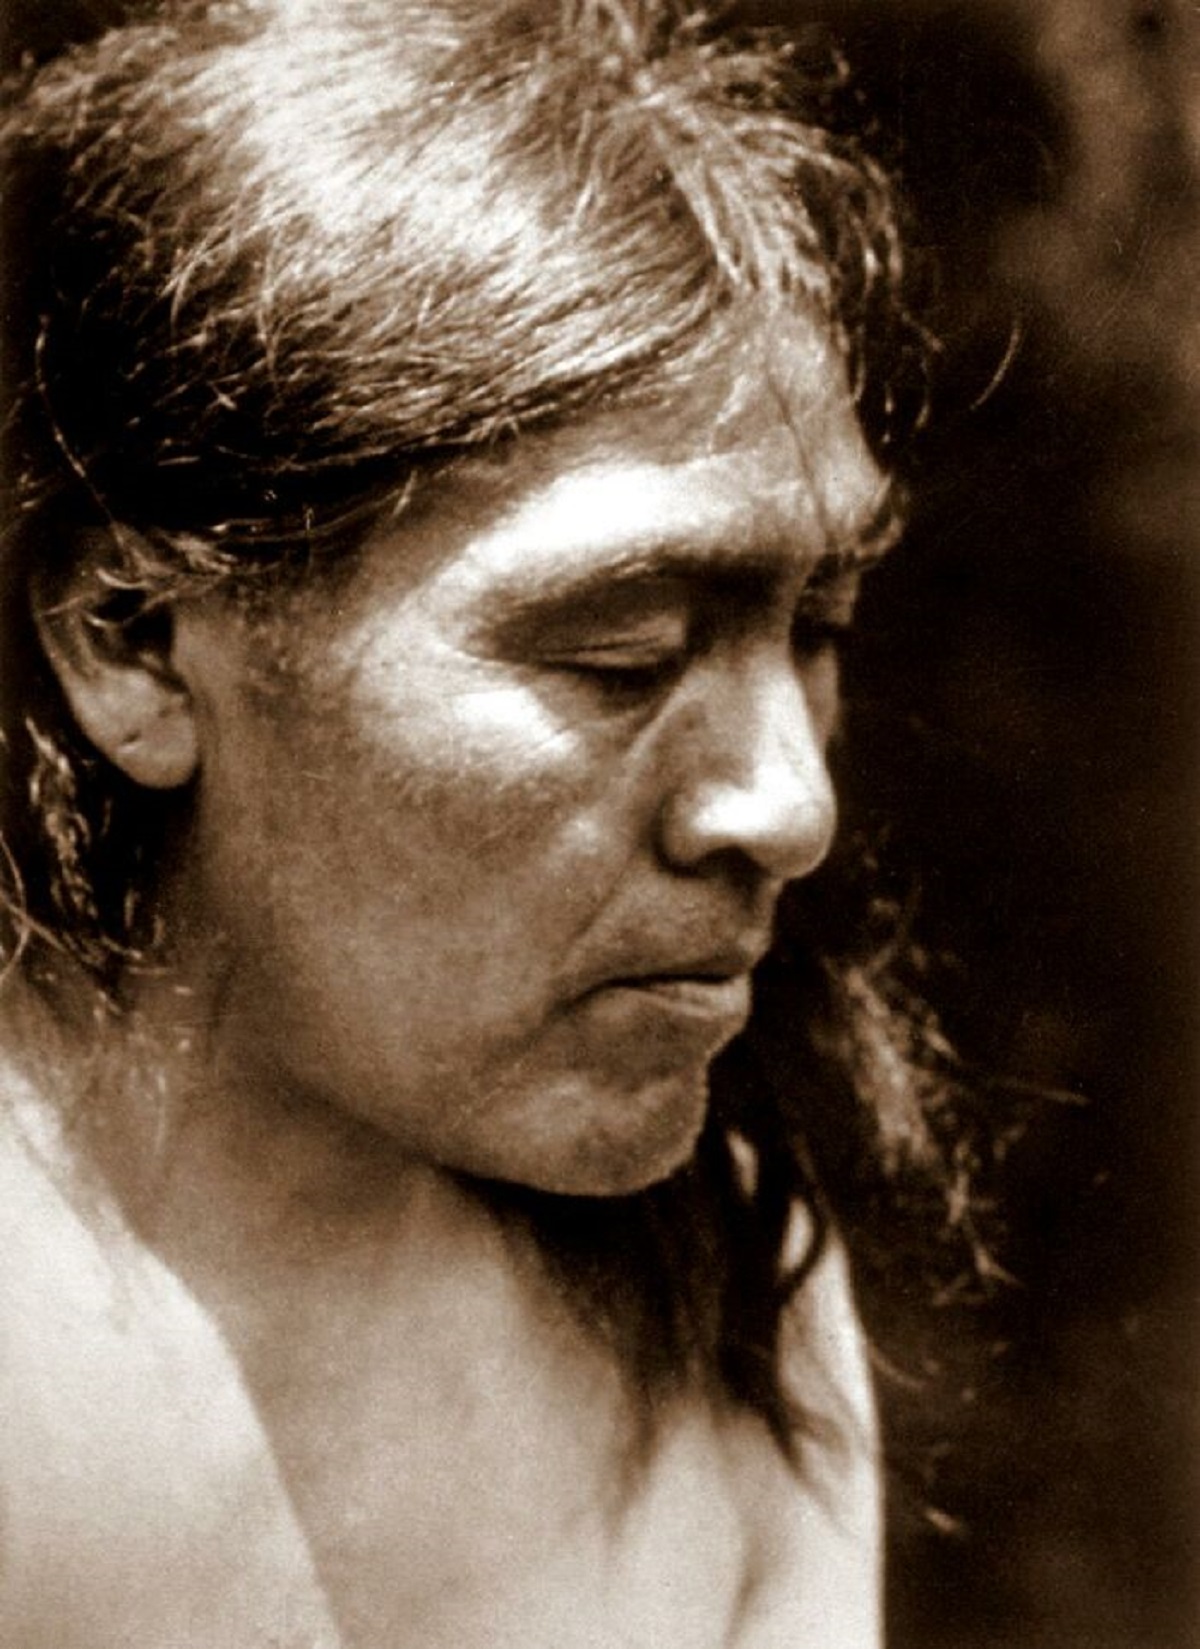 The name of Ishi, known as the 'last wild indian' is an adopted name. In the Yahi culture, he one cannot speak his own name until introduced by another Yahi. When asked his name, he said: "I have none, because there were no people to name me".